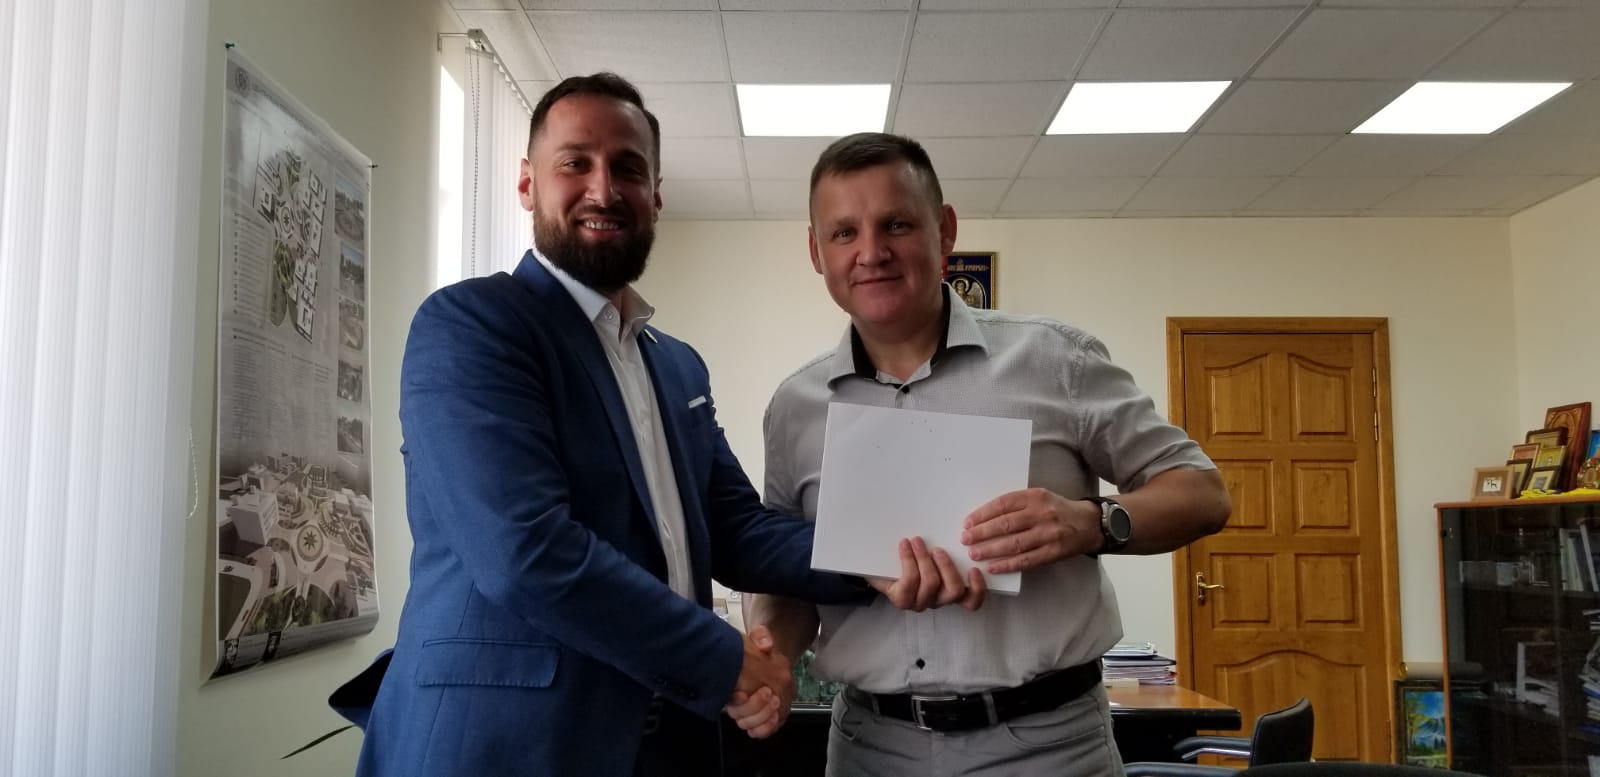 Mayor of Slavutych (Town created for Chernobyl survivors), With Lucas Hixon, a Fan of the Book